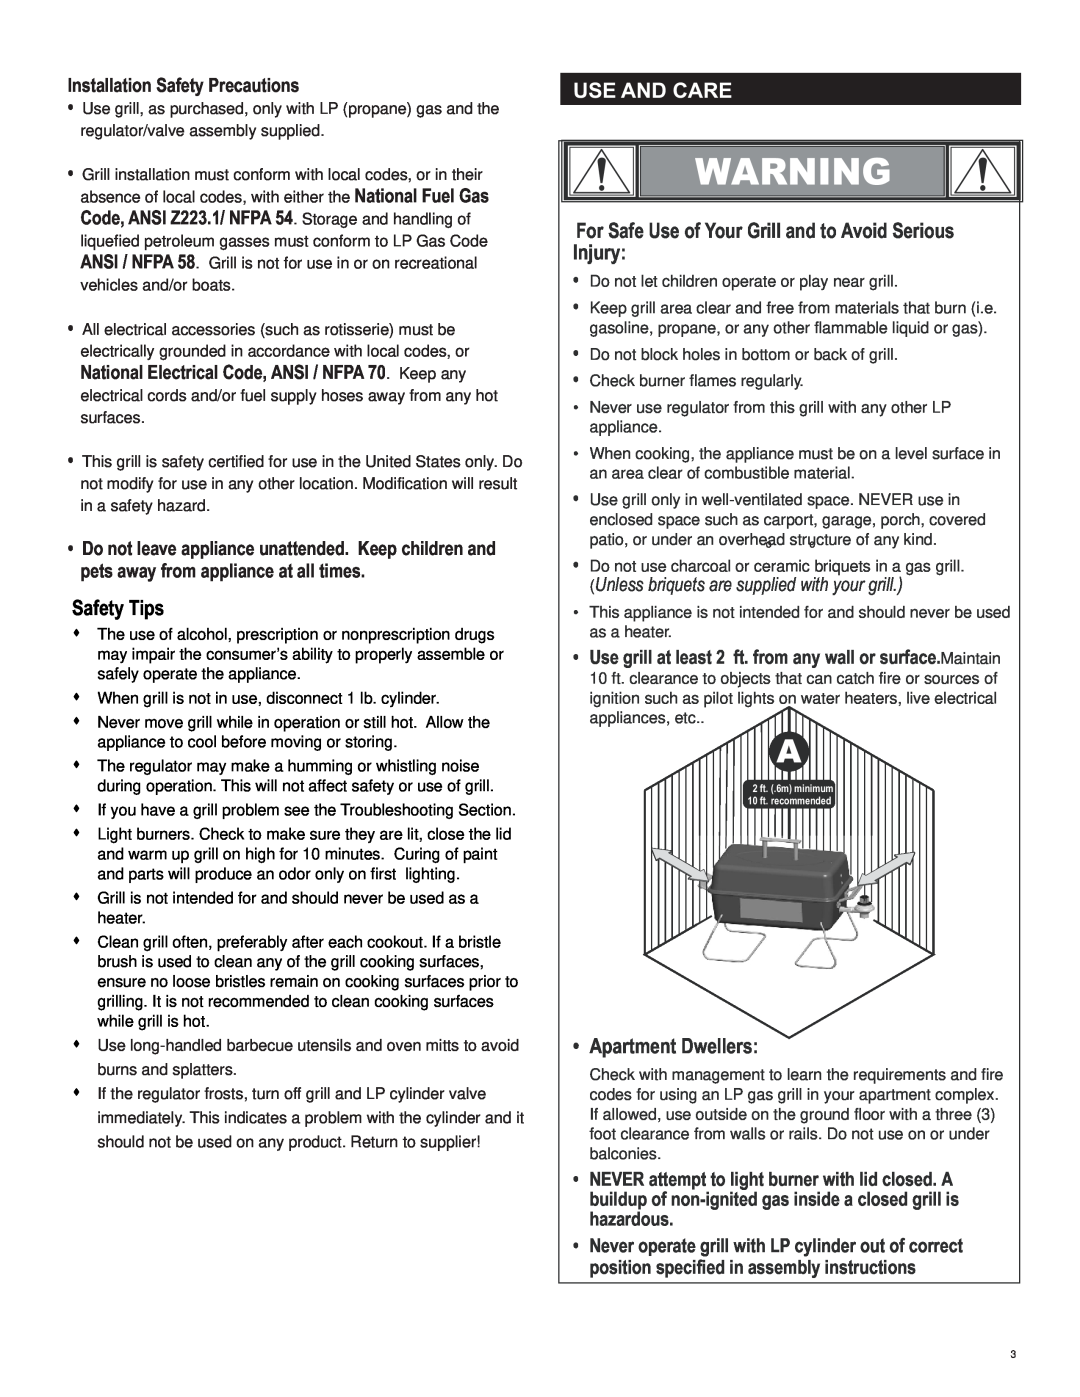 Char-Broil 461111811 Safety Tips, Use And Care, For Safe Use of Your Grill and to Avoid Serious Injury, Apartment Dwellers 